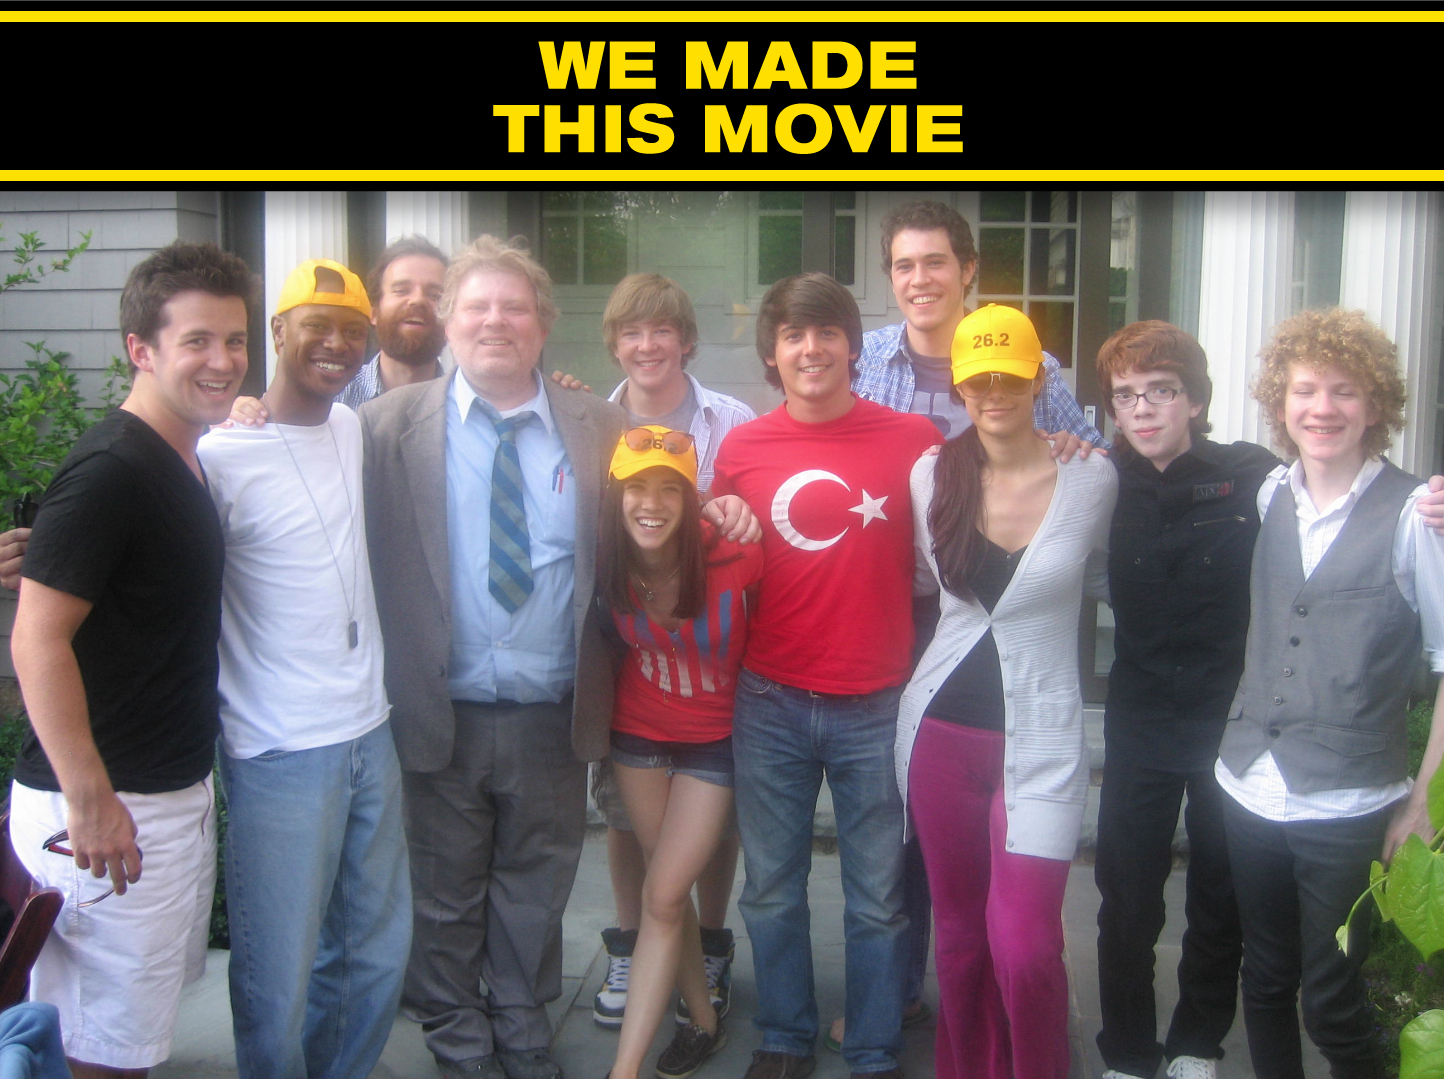 Joe Hansard (in suit) as Mr. Matusek, with the cast of We Made This Movie, the inaugural feature film from David Letterman's Worldwide Pants. Distributed by SnagFilms, WMTM release date is September 20, 2012!